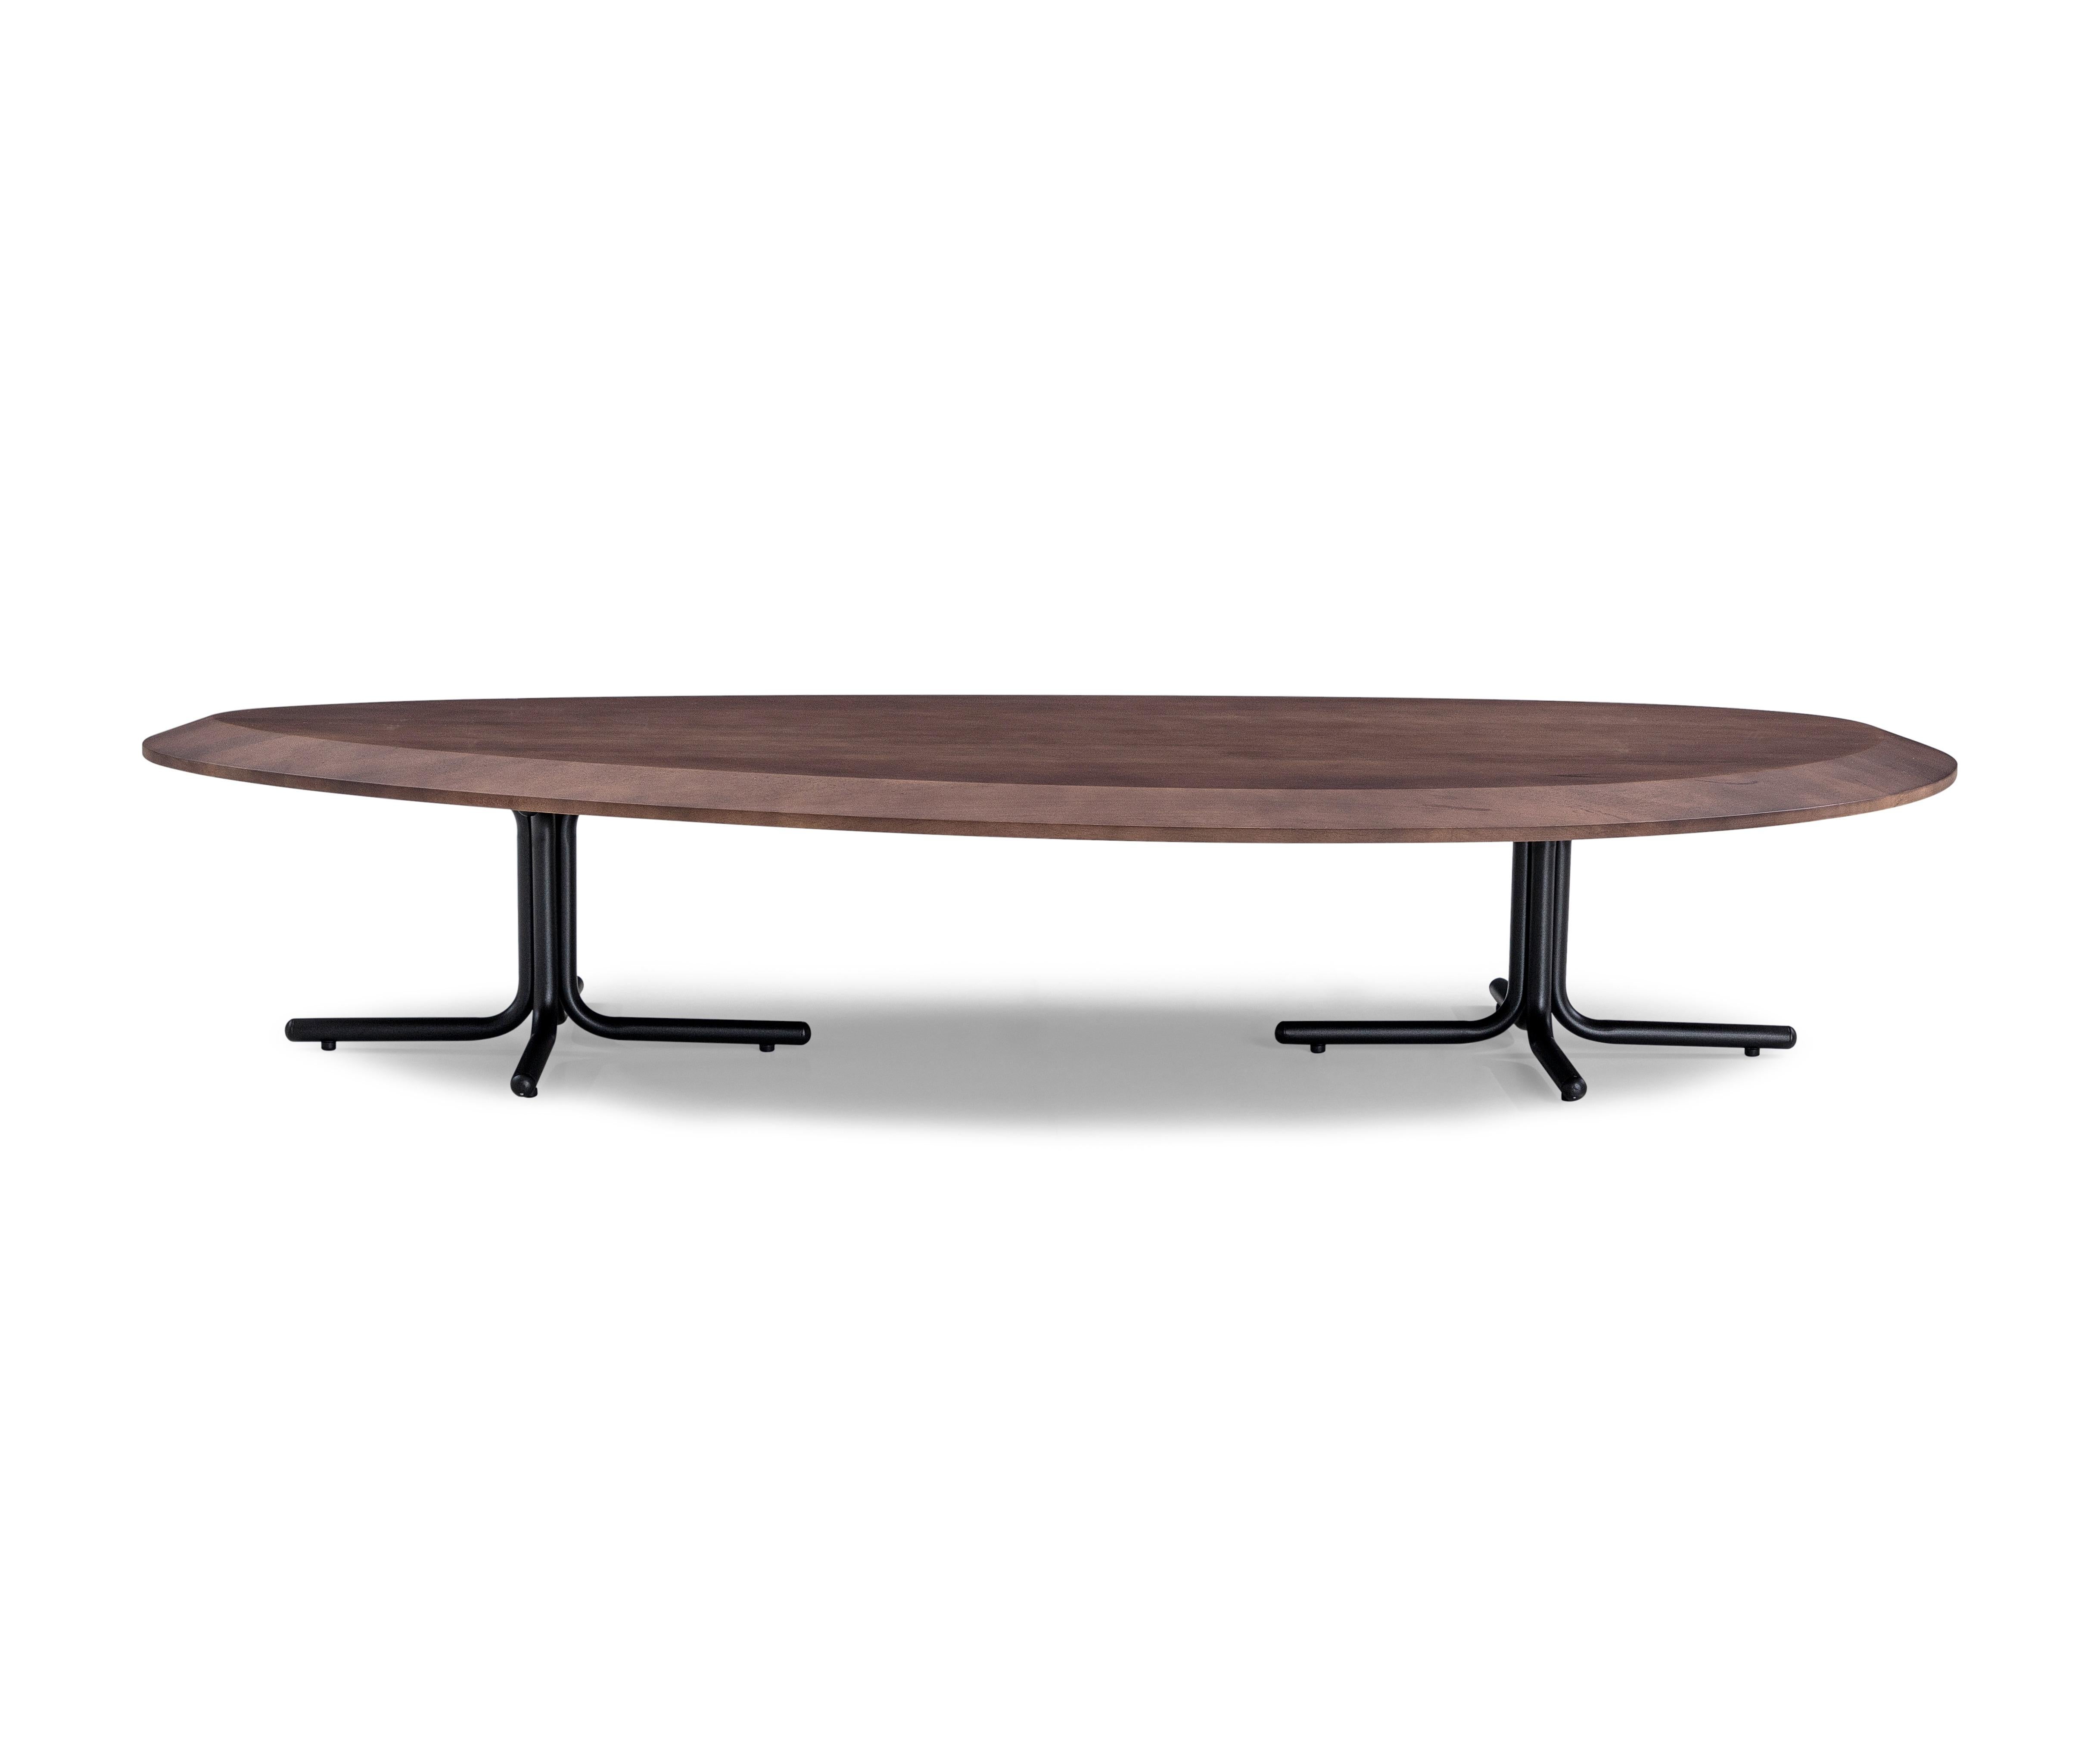 Pante Coffee Table in Walnut Wood Finish and Black Legs, Set of 4 For Sale 3